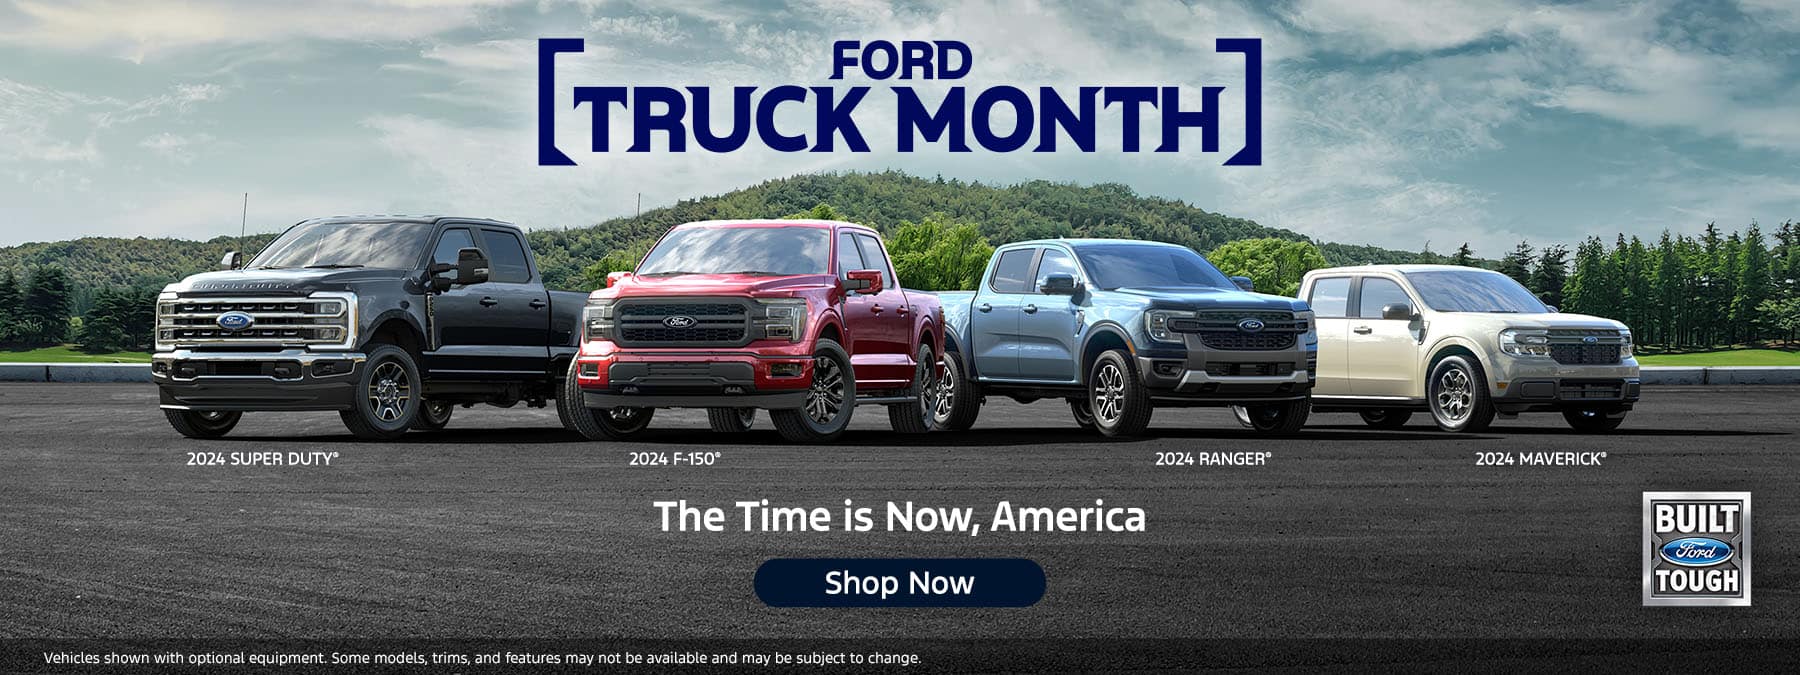 Ford Truck Month 2024